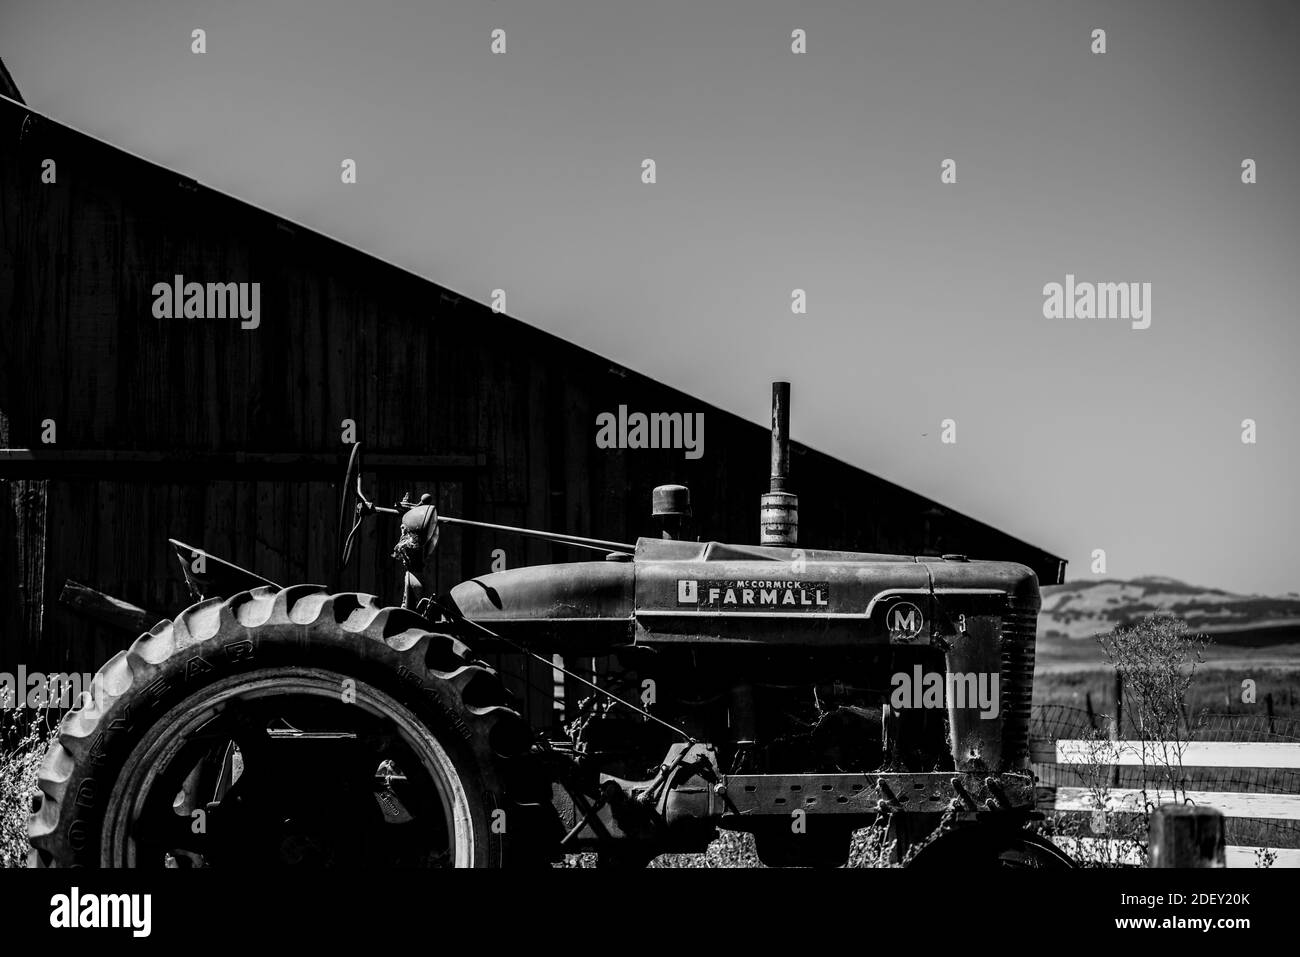 PETALUMA, UNITED STATES - Jul 17, 2019: An old tractor left next to a barn out in the open Stock Photo